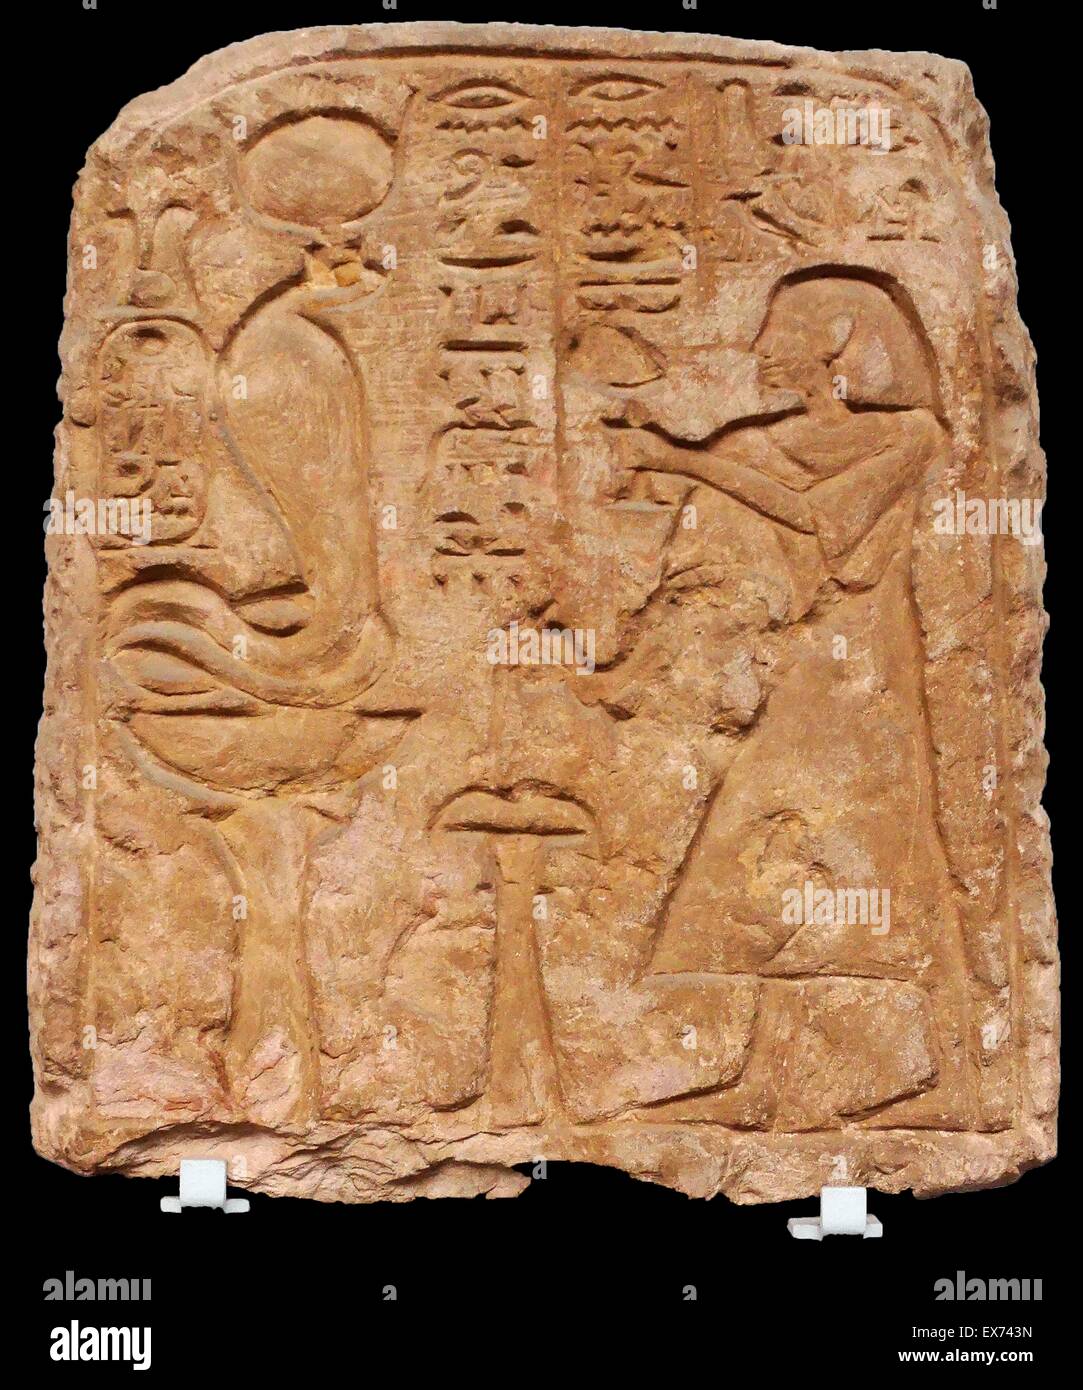 Sandstone stela of the Egyptian Viceroy of Kush, Setau. He is shown on the right pouring a libation over an altar and offering incense to the goddess Renenutet, represented as a serpent seated upon a basket on a stand. From Wadi Halfa 1200s BC (19th Dynas Stock Photo